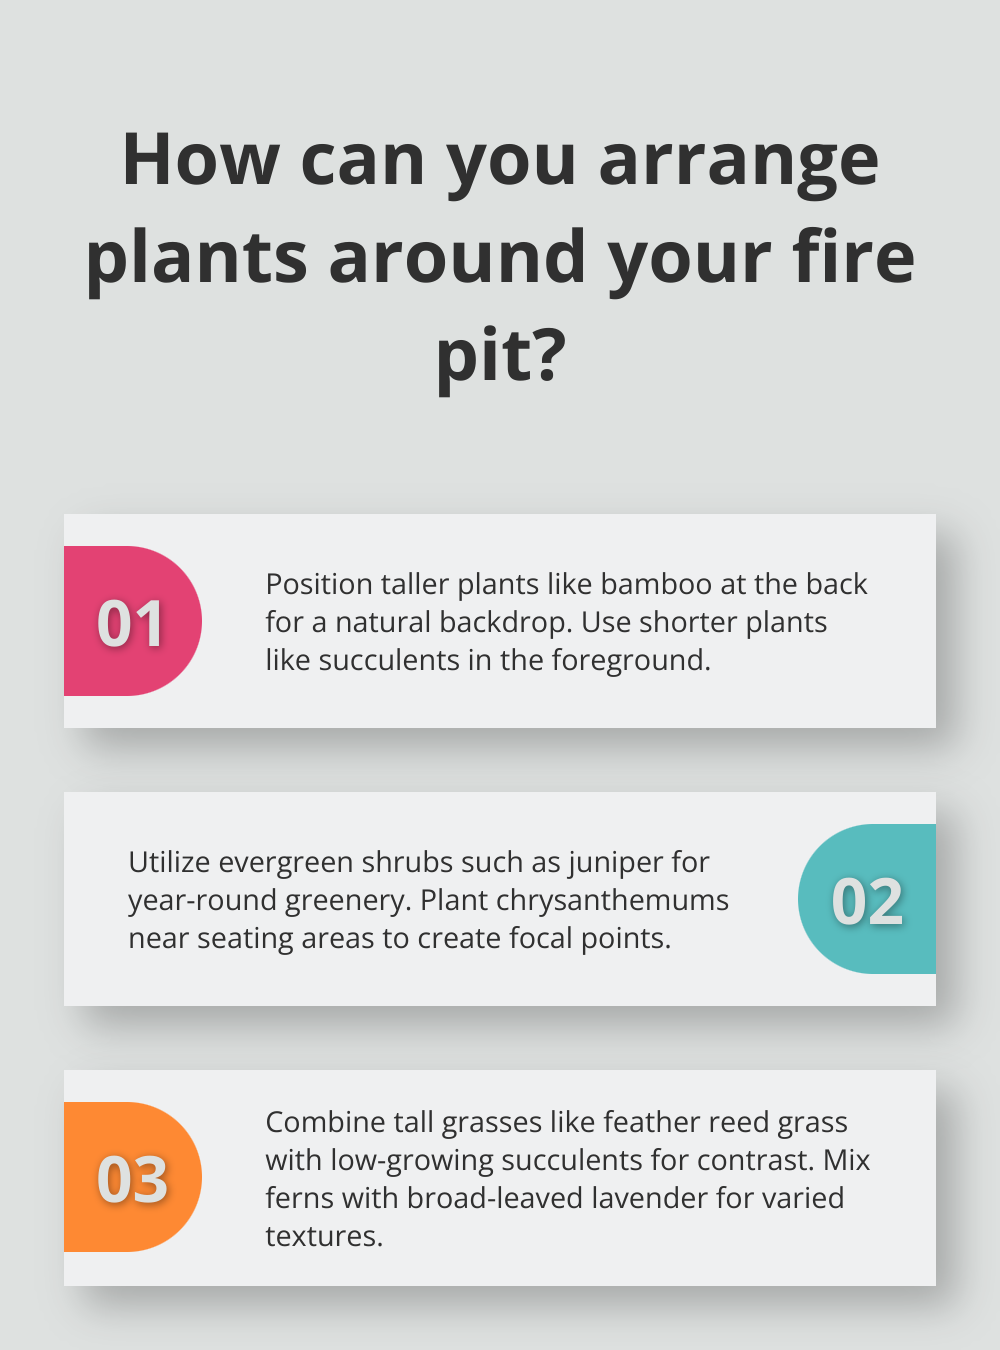 Fact - How can you arrange plants around your fire pit?